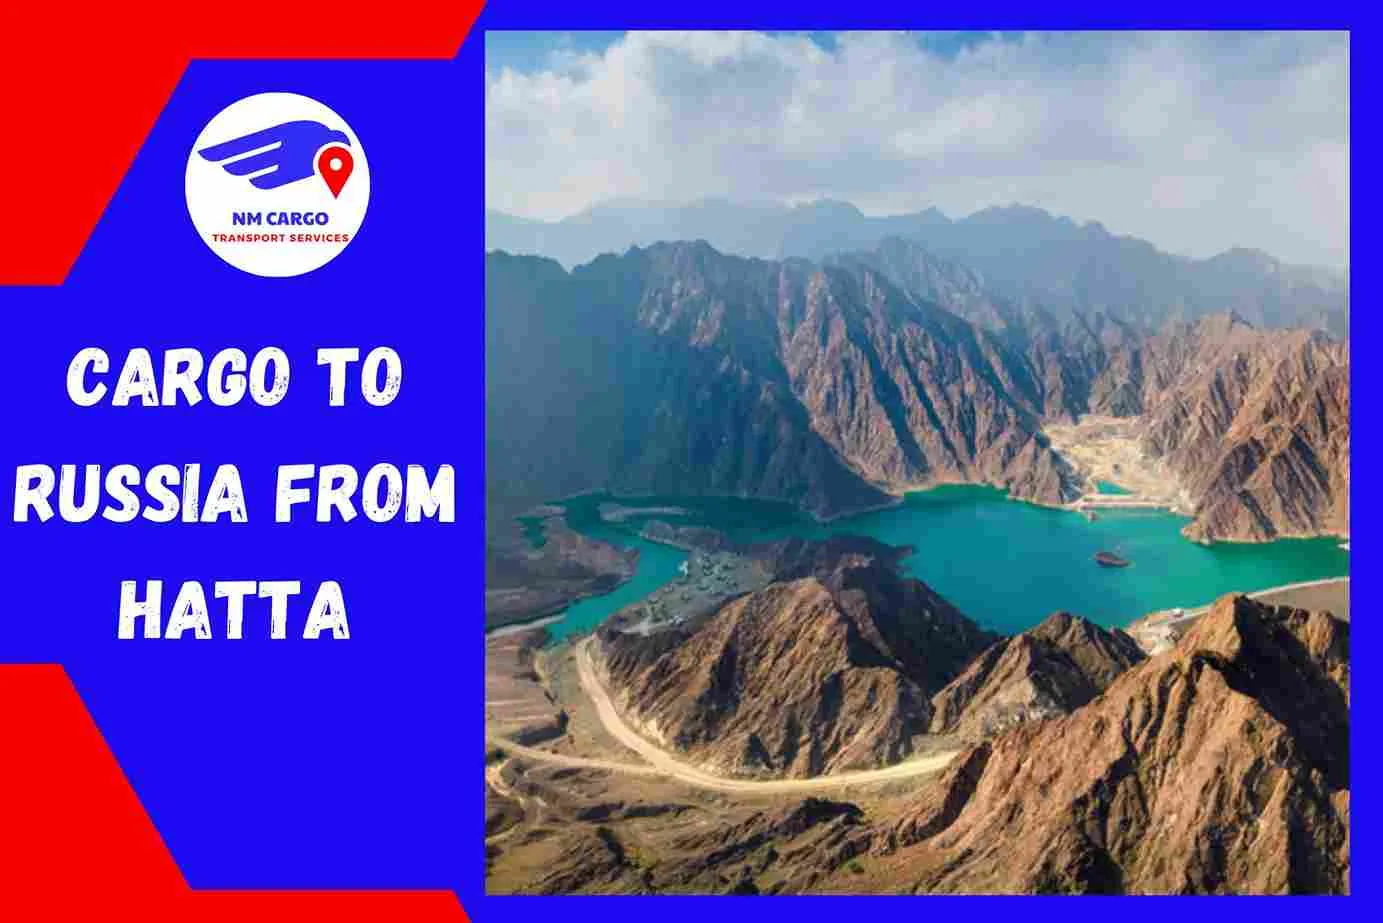 Cargo to Russia from Hatta